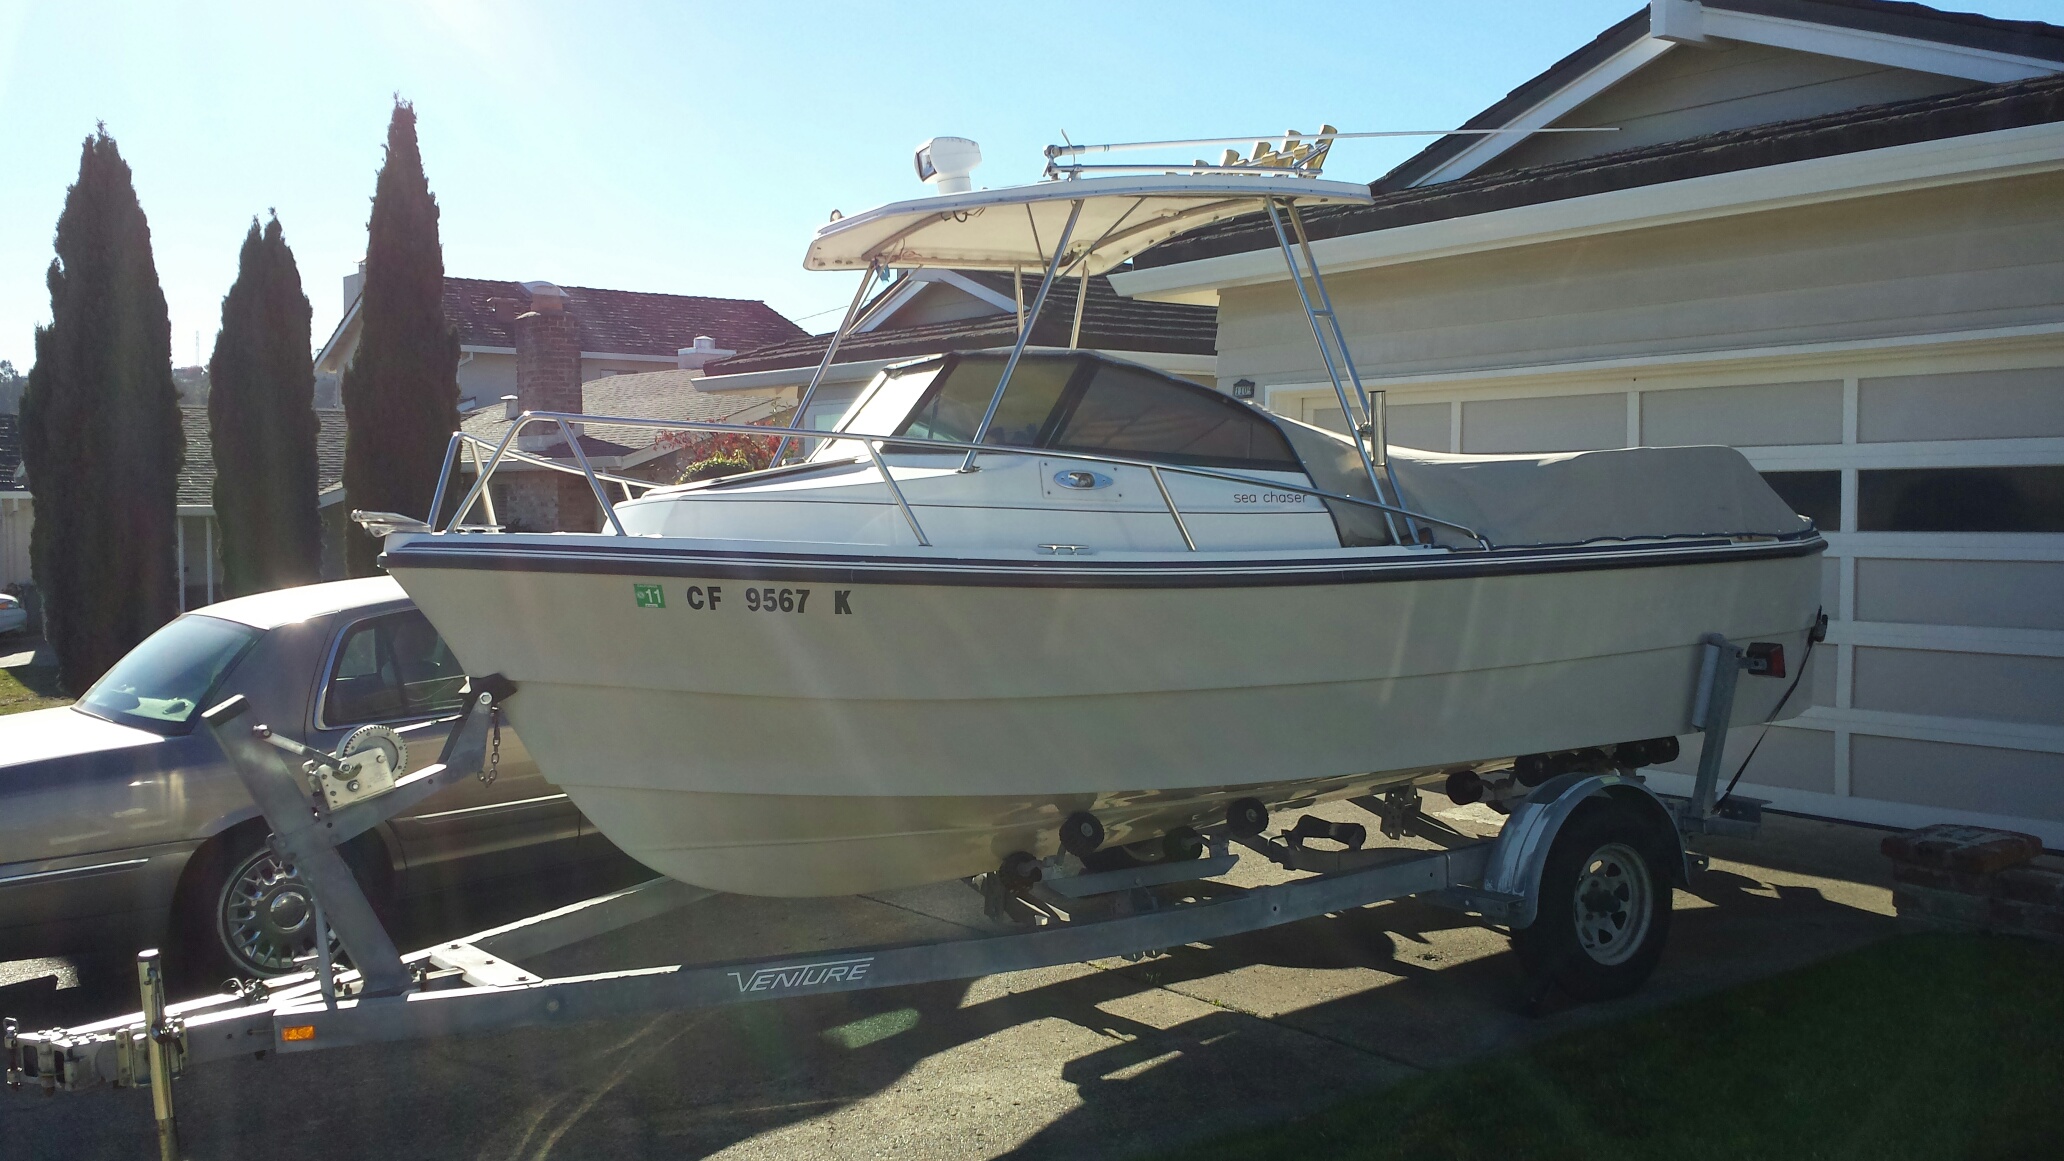 Andy's 17' Sea Chaser #1